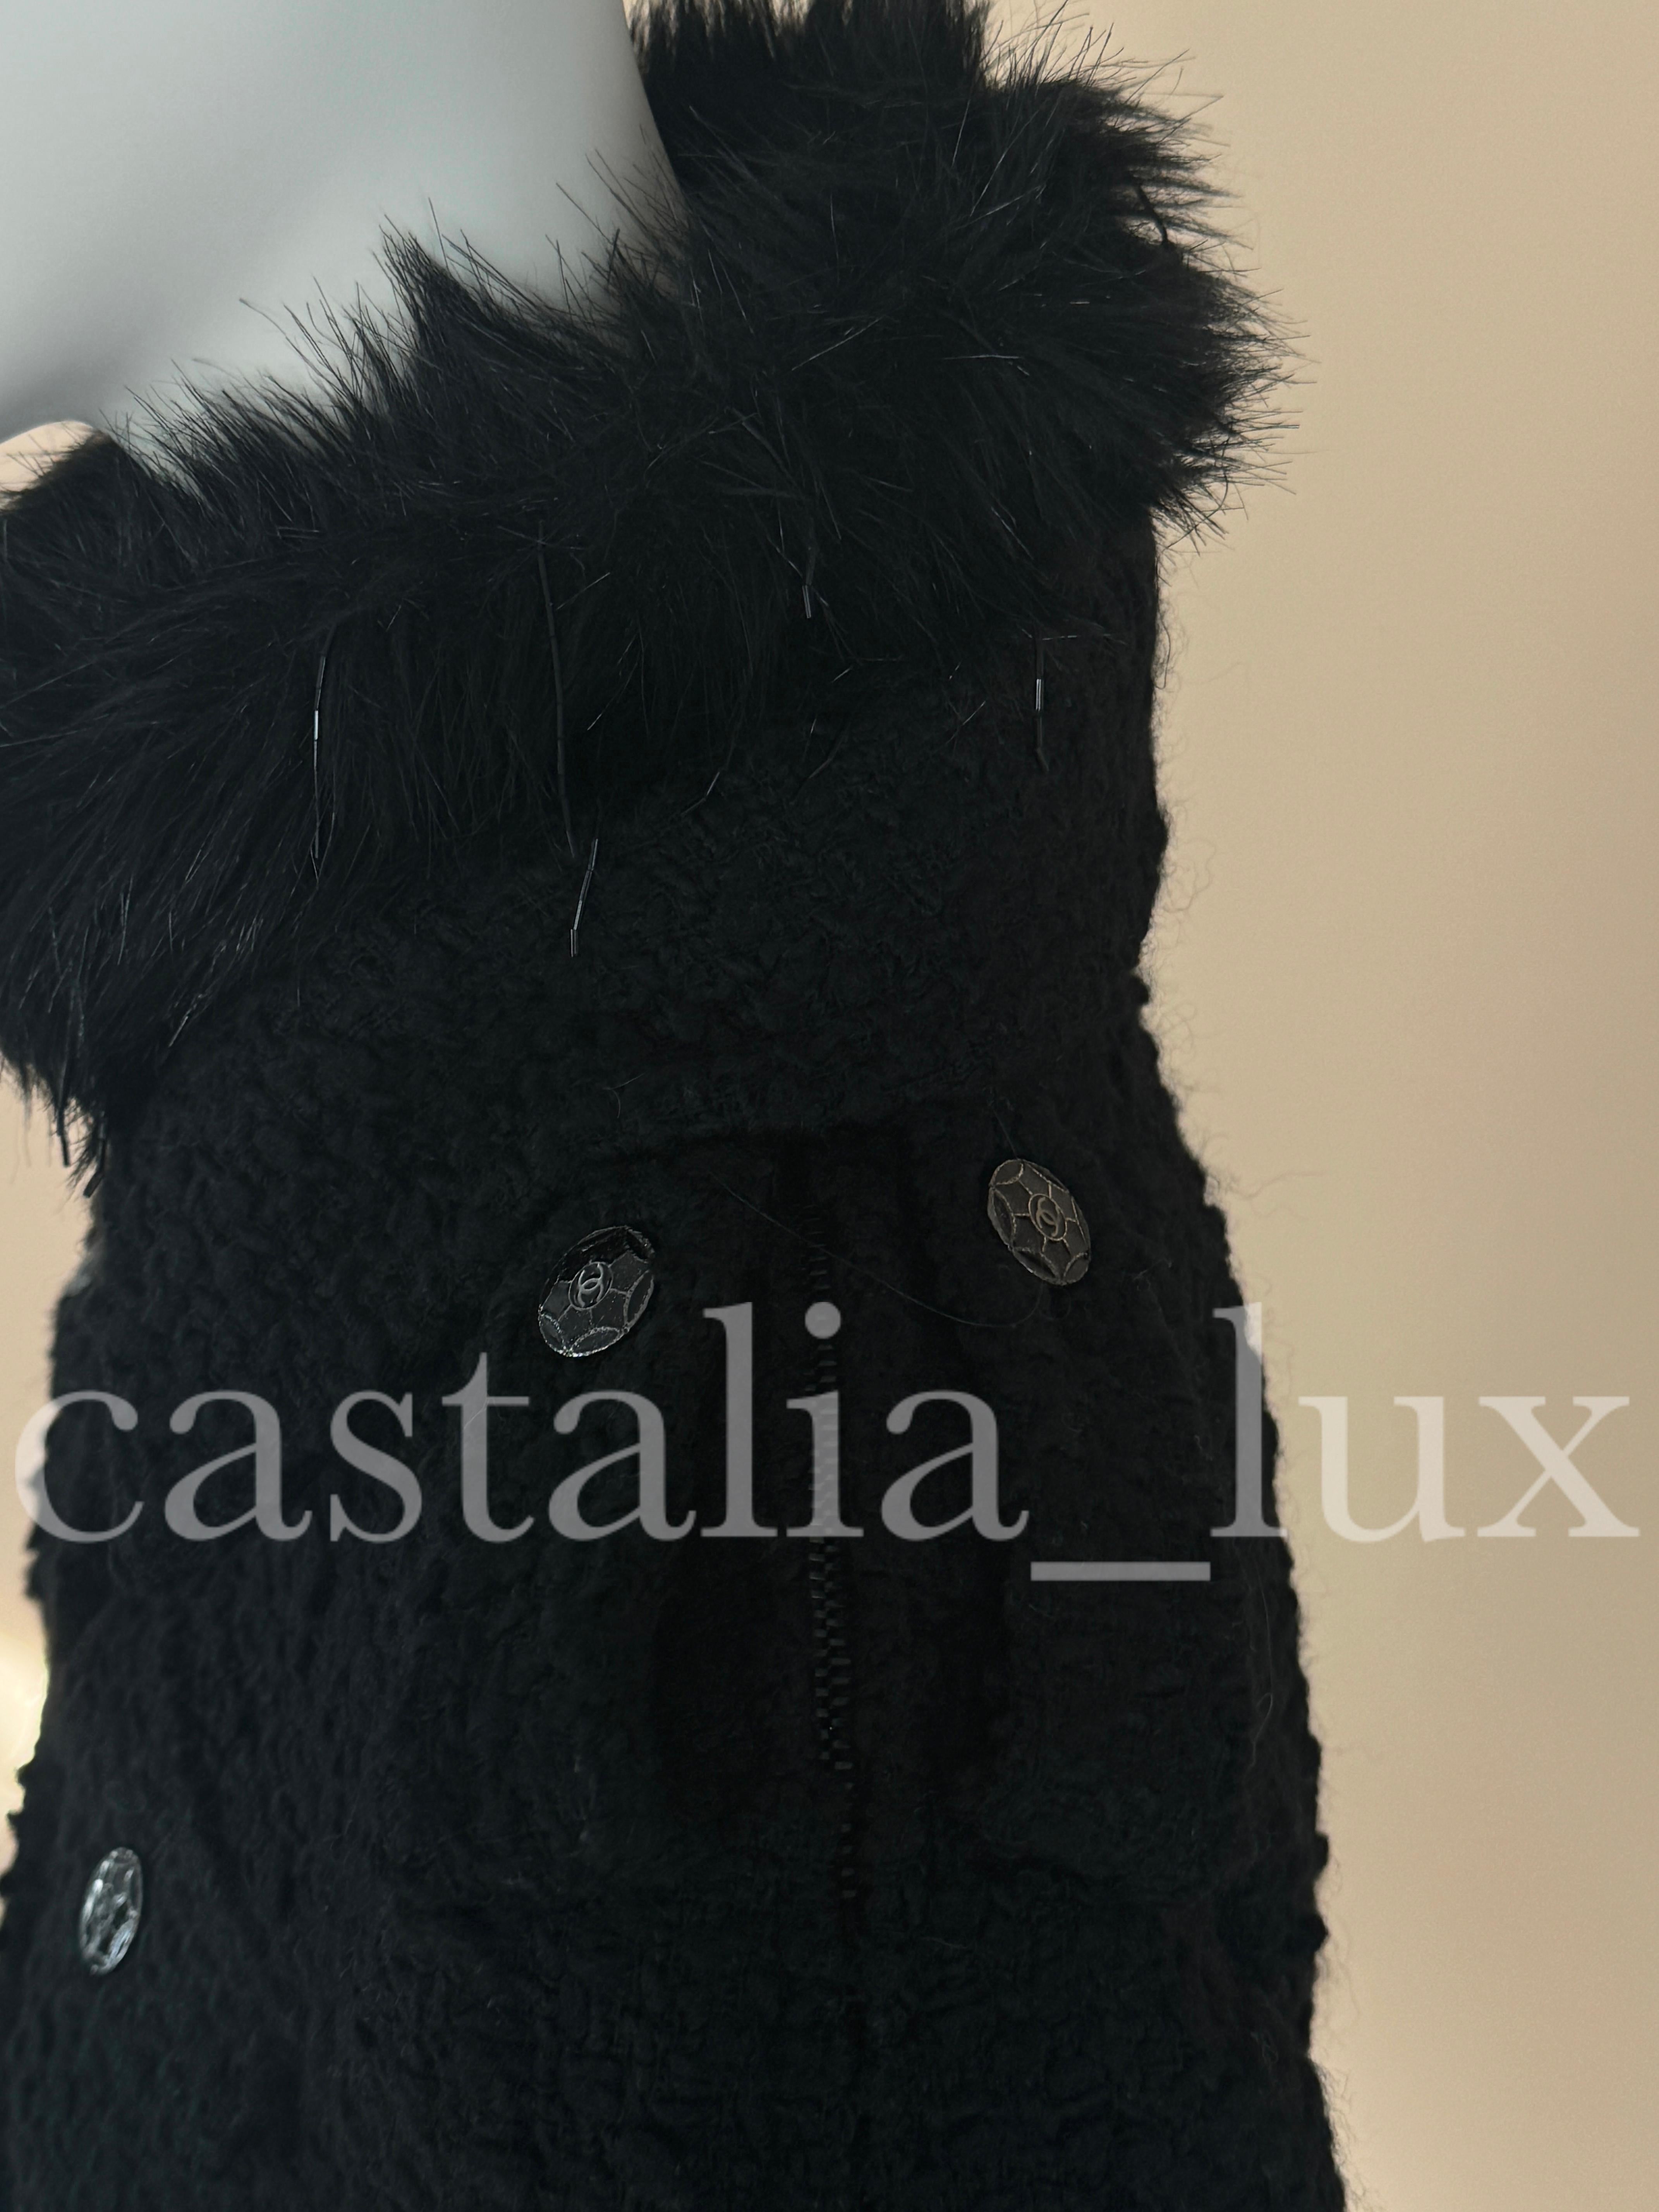 Chanel Jewel Embellishment Black Tweed Coat with Faux Fur Details For Sale 4